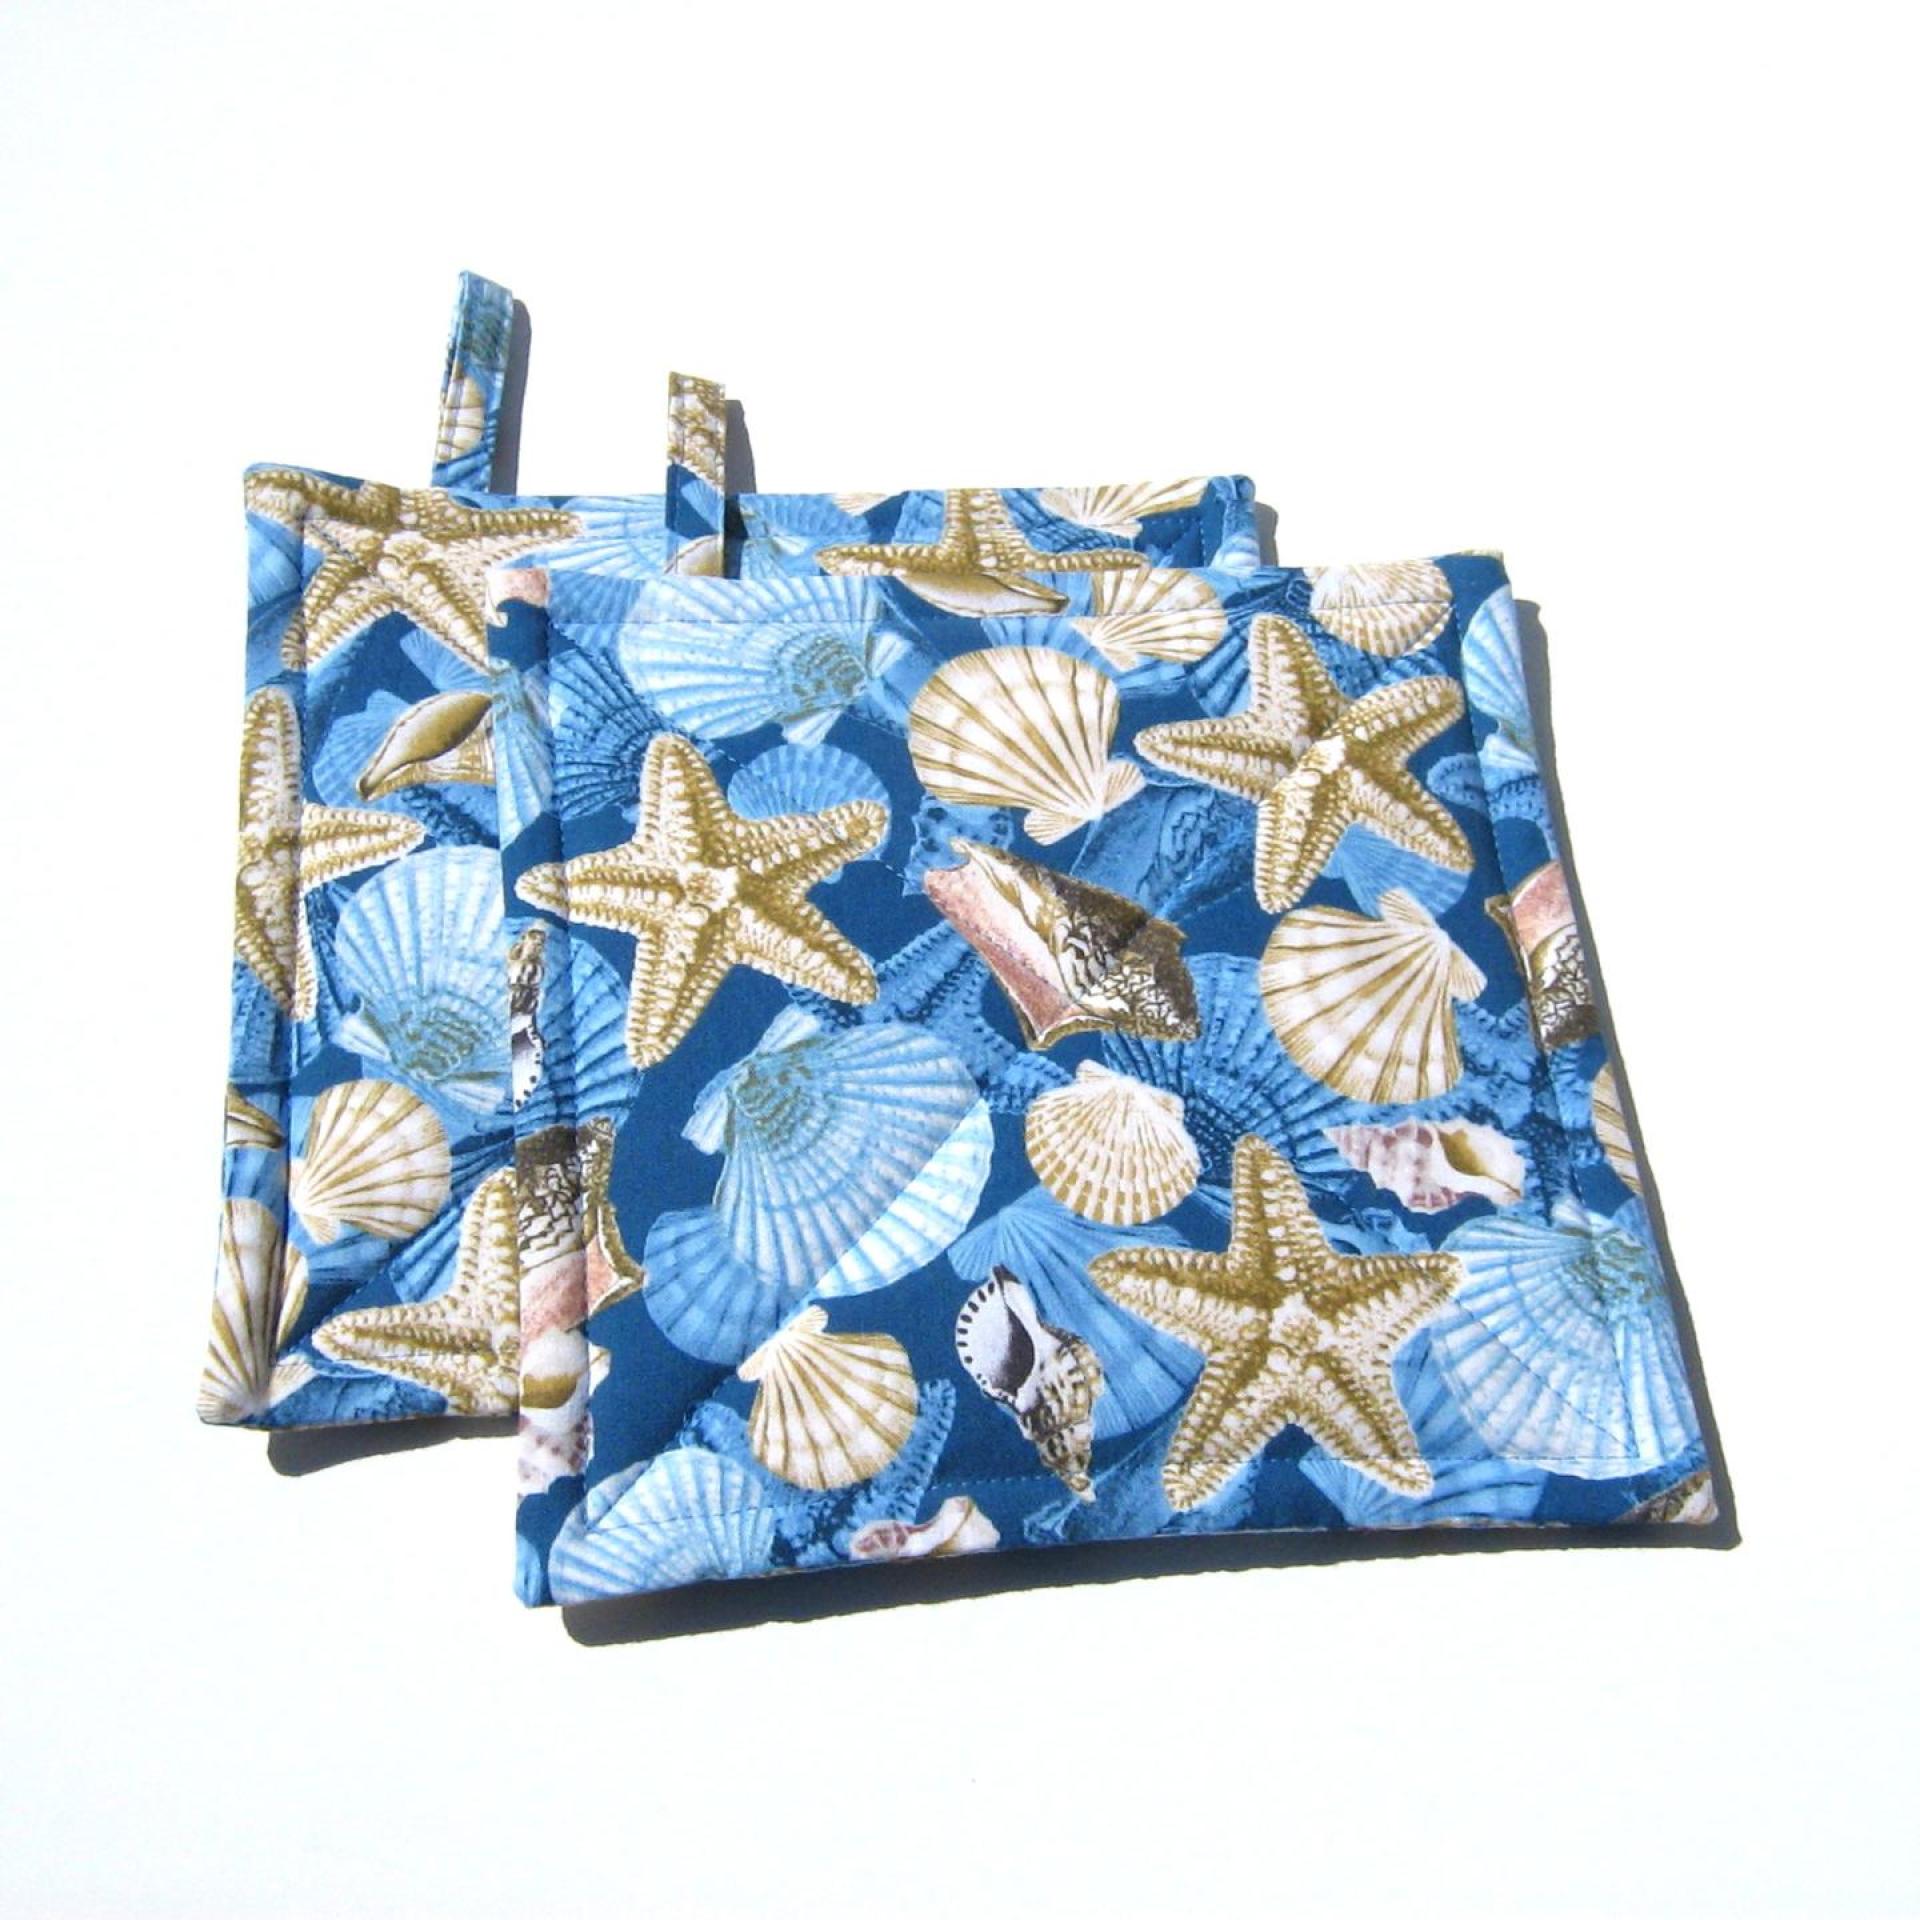 Seashell and Starfish Potholders in Blue and Tan, Quilted Hot Pads, Beach House Kitchen Décor, USA Handmade Gift